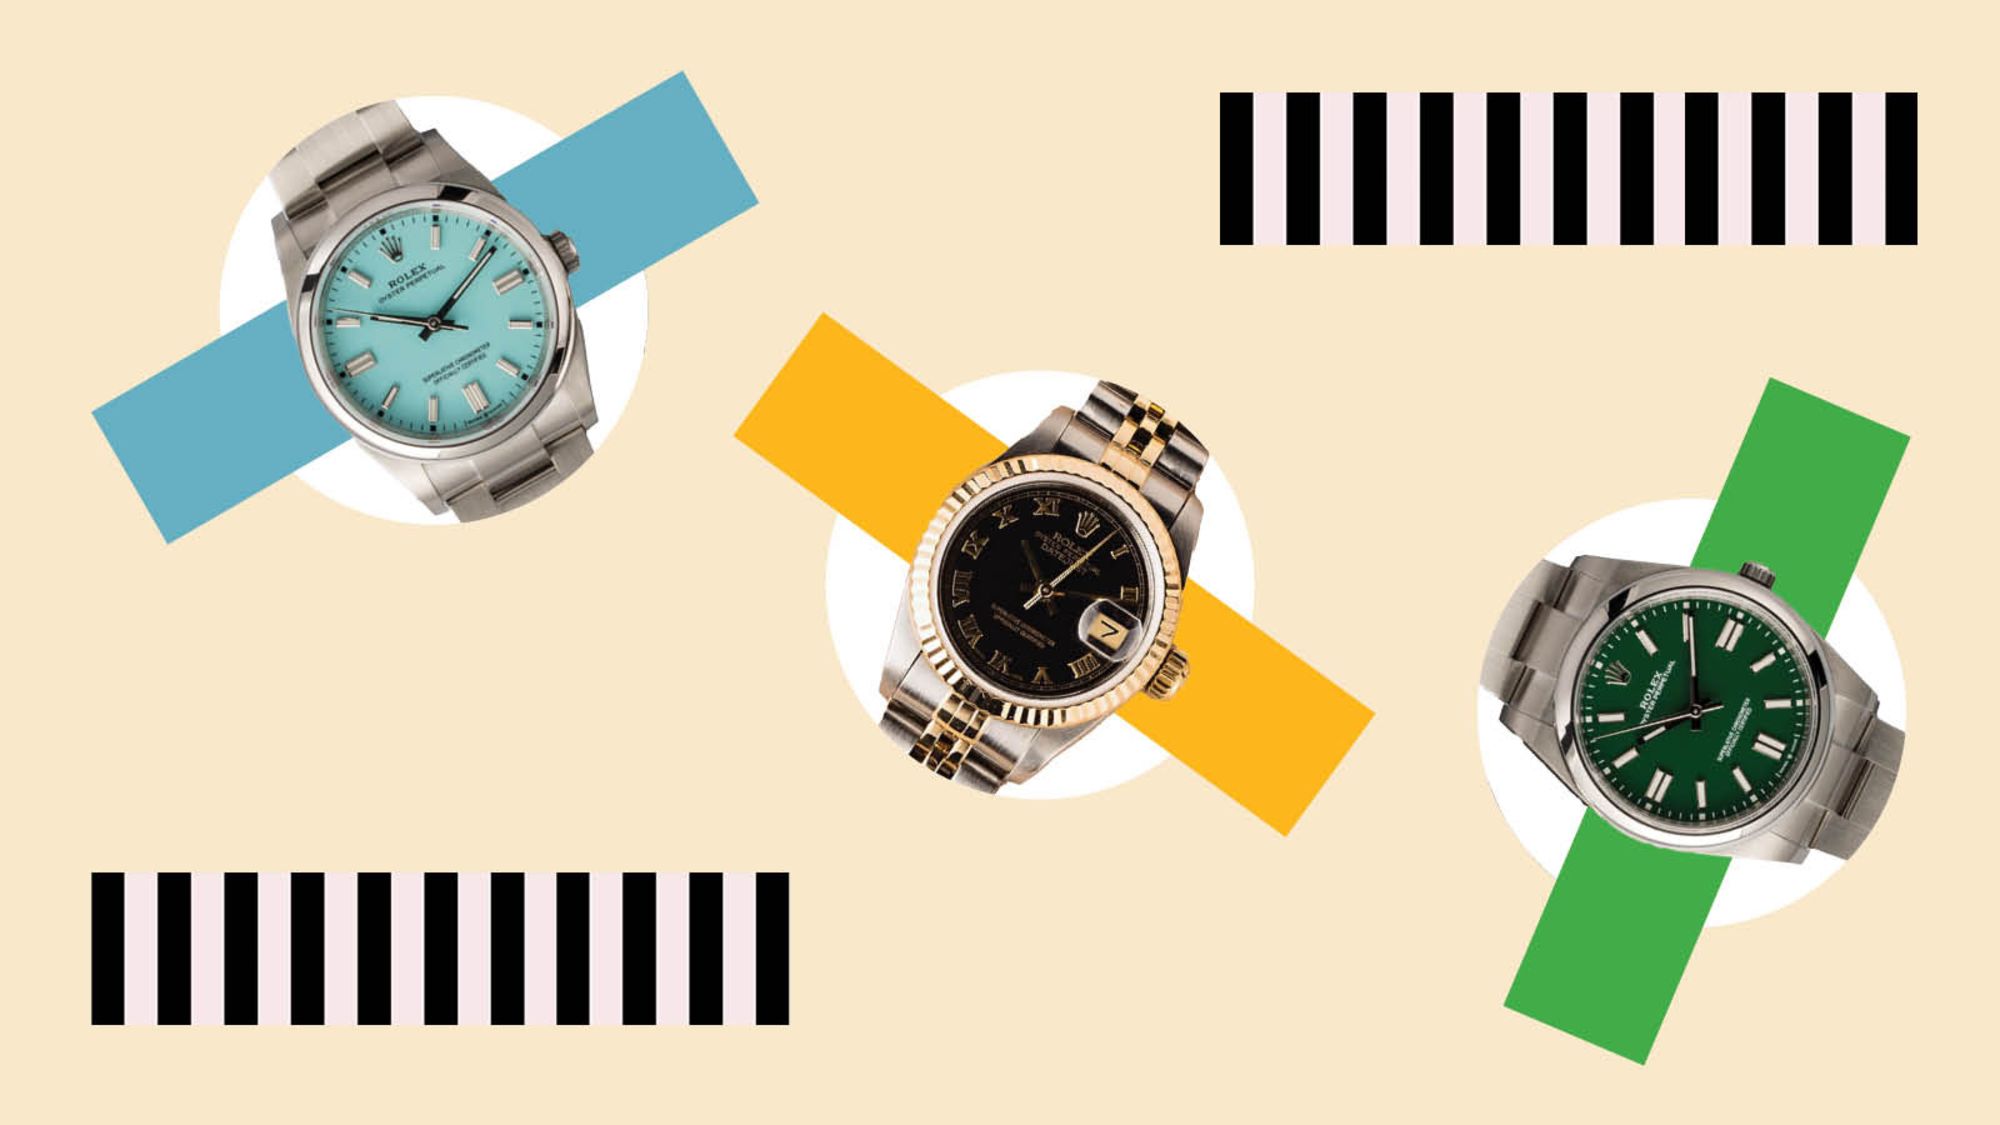 What do prospective buyers need know about the market for certified pre-owned luxury watches? Here, experts offer their best — and timely — advice.